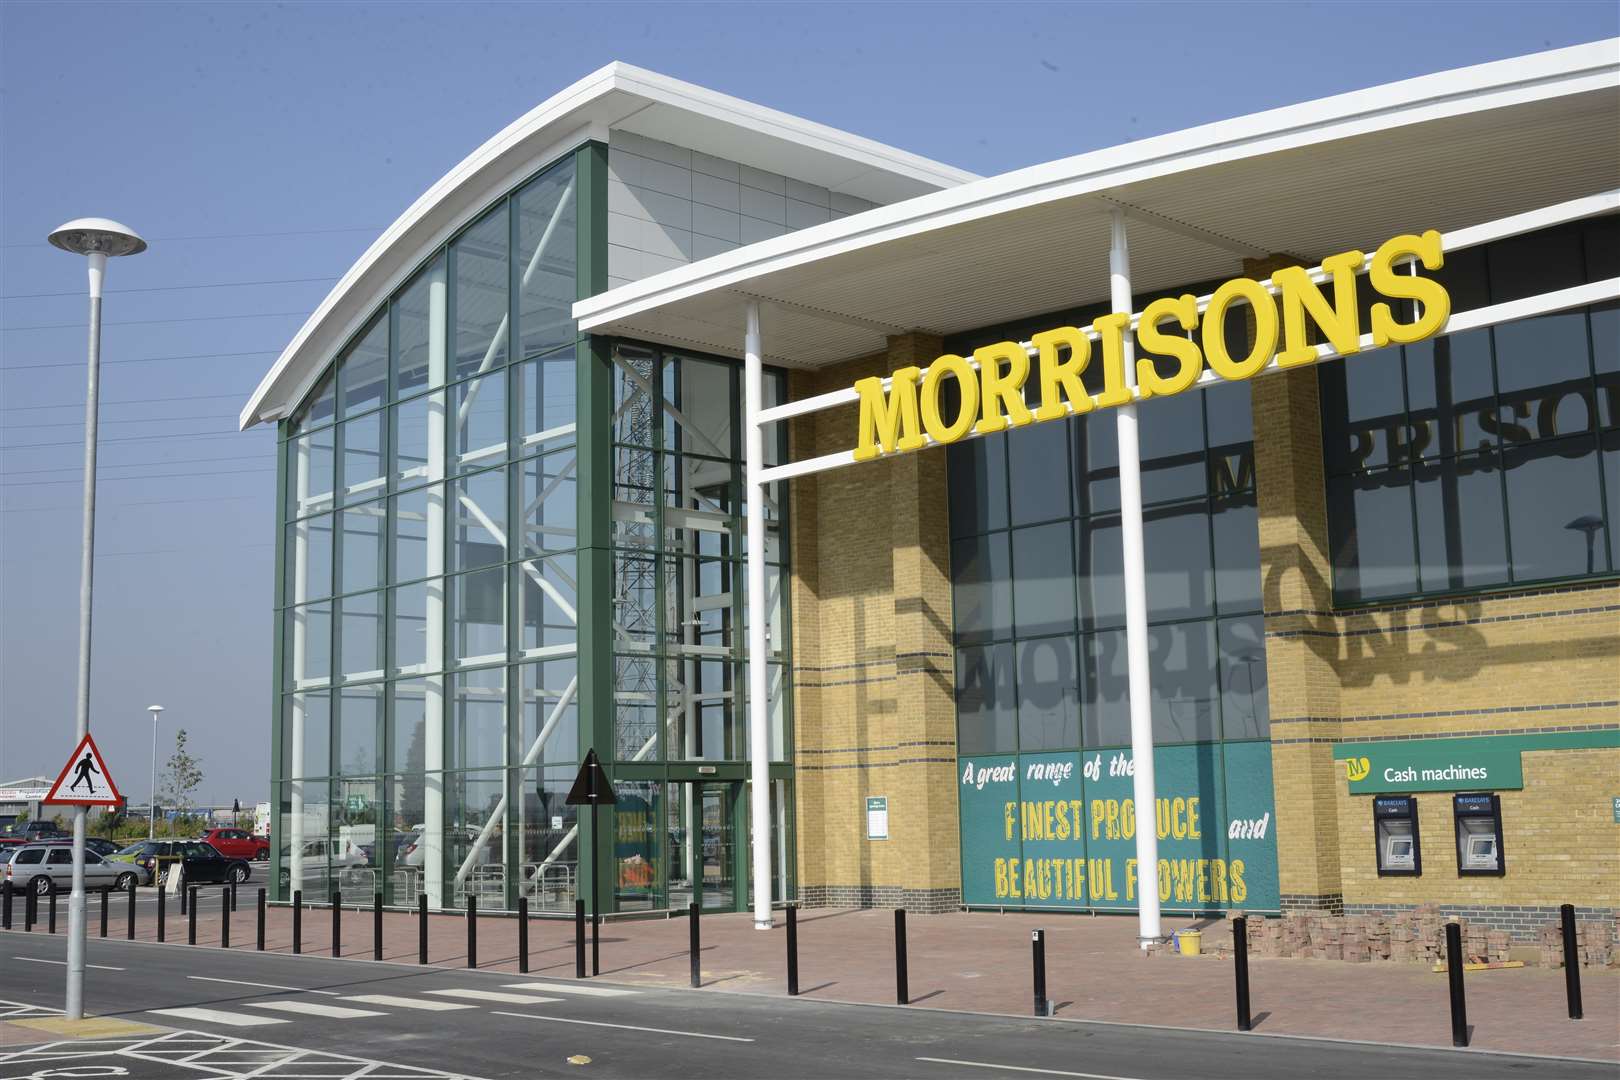 The Morrisons store at Queenborough, Sheppey